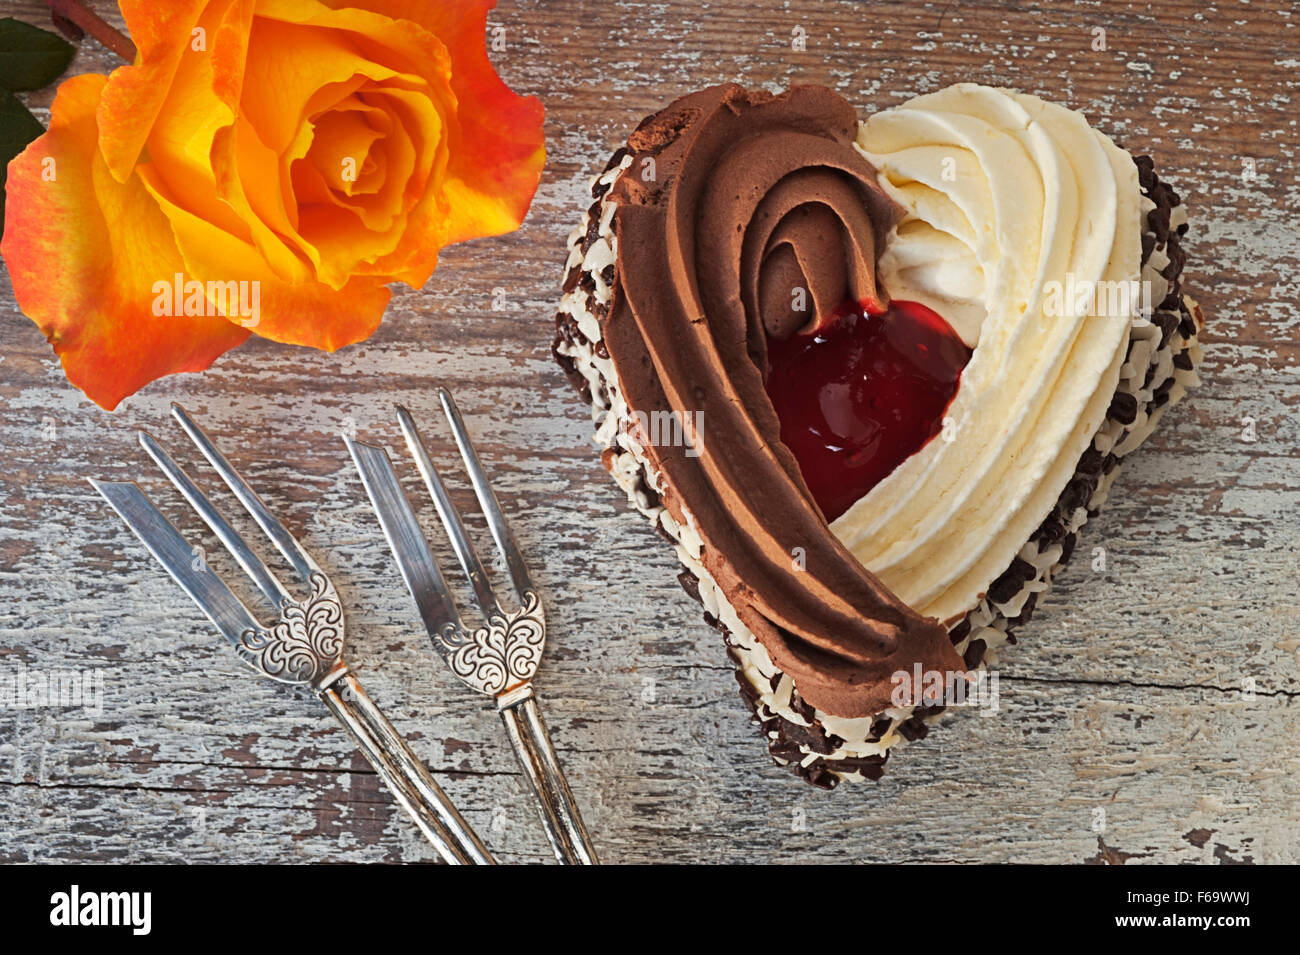 Still life with heart-shaped cake, two ornate pastry forks and an orange rose Stock Photo